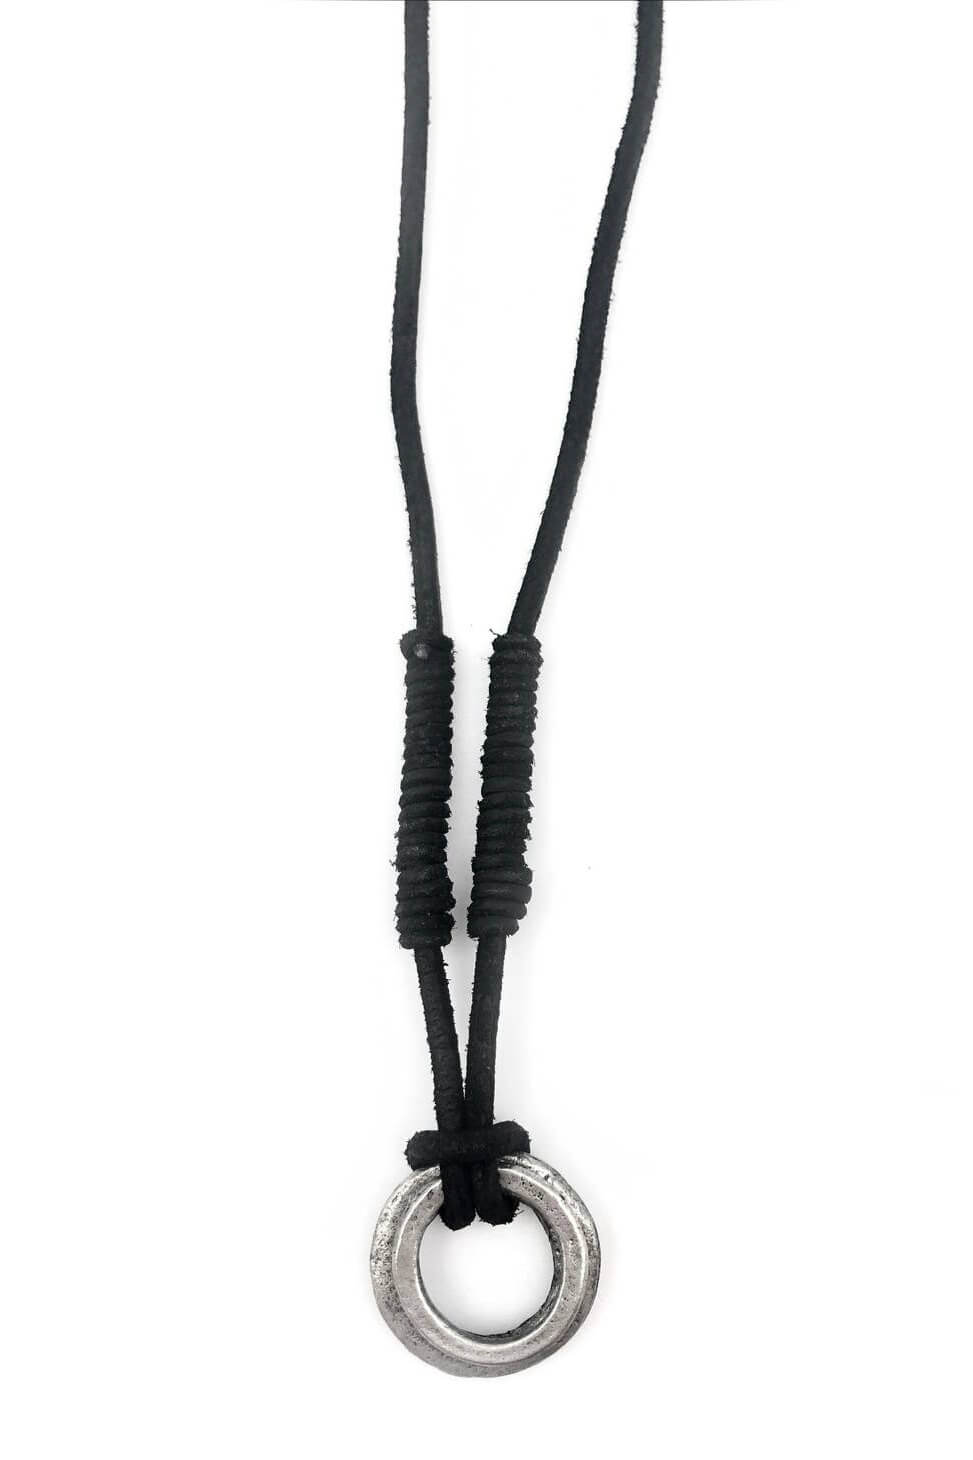 Aadi Silver Ring Black Leather Necklace